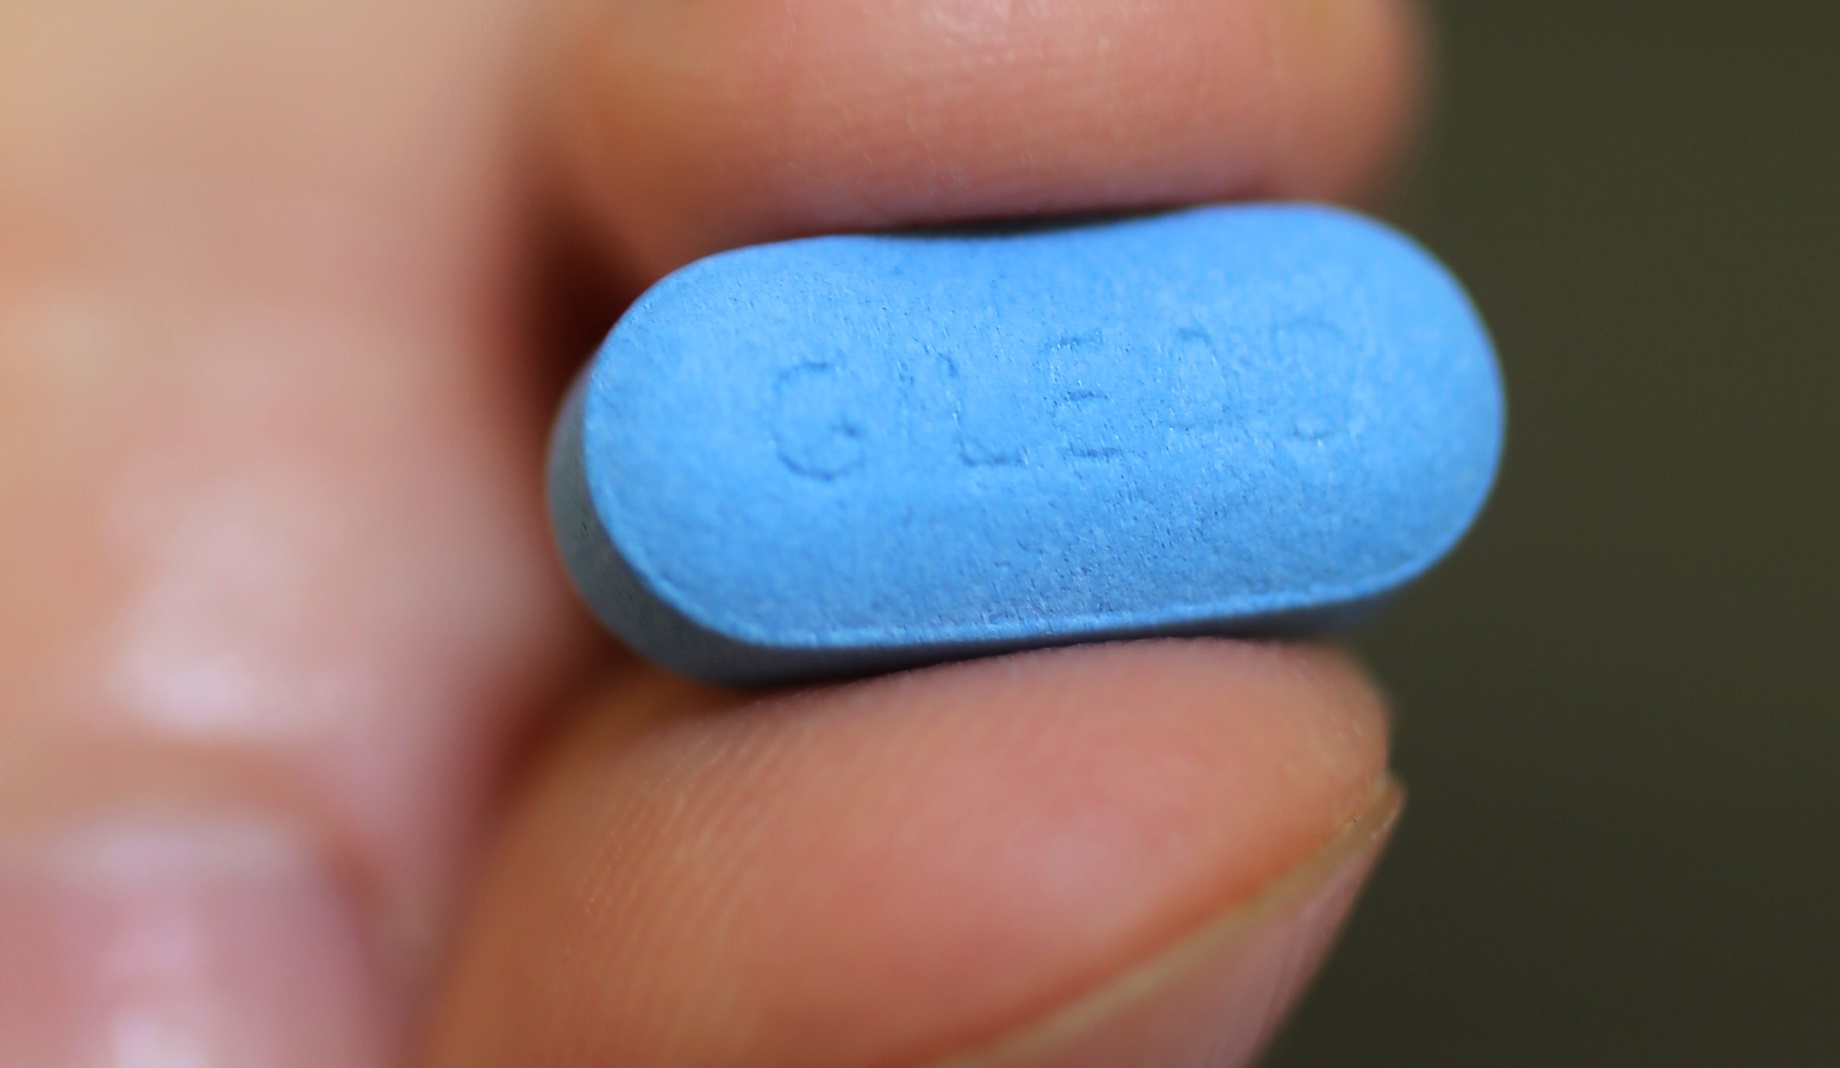 HIV-preventing PrEP drugs will be made available for free in the US